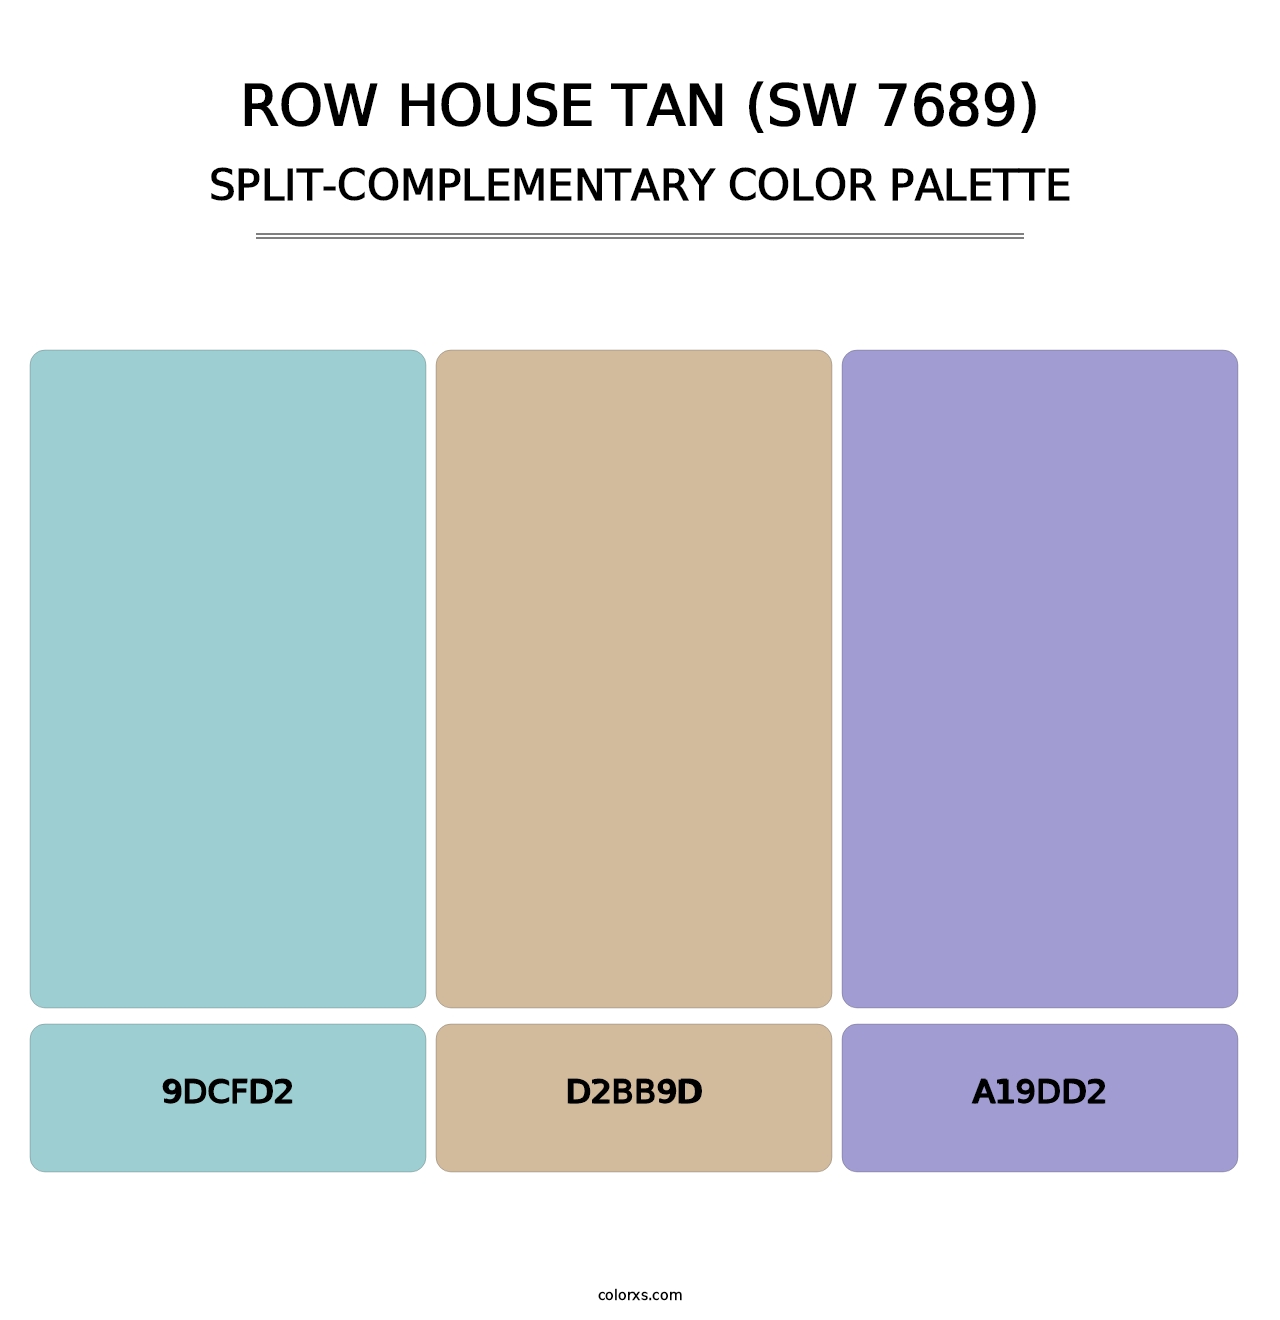 Row House Tan (SW 7689) - Split-Complementary Color Palette